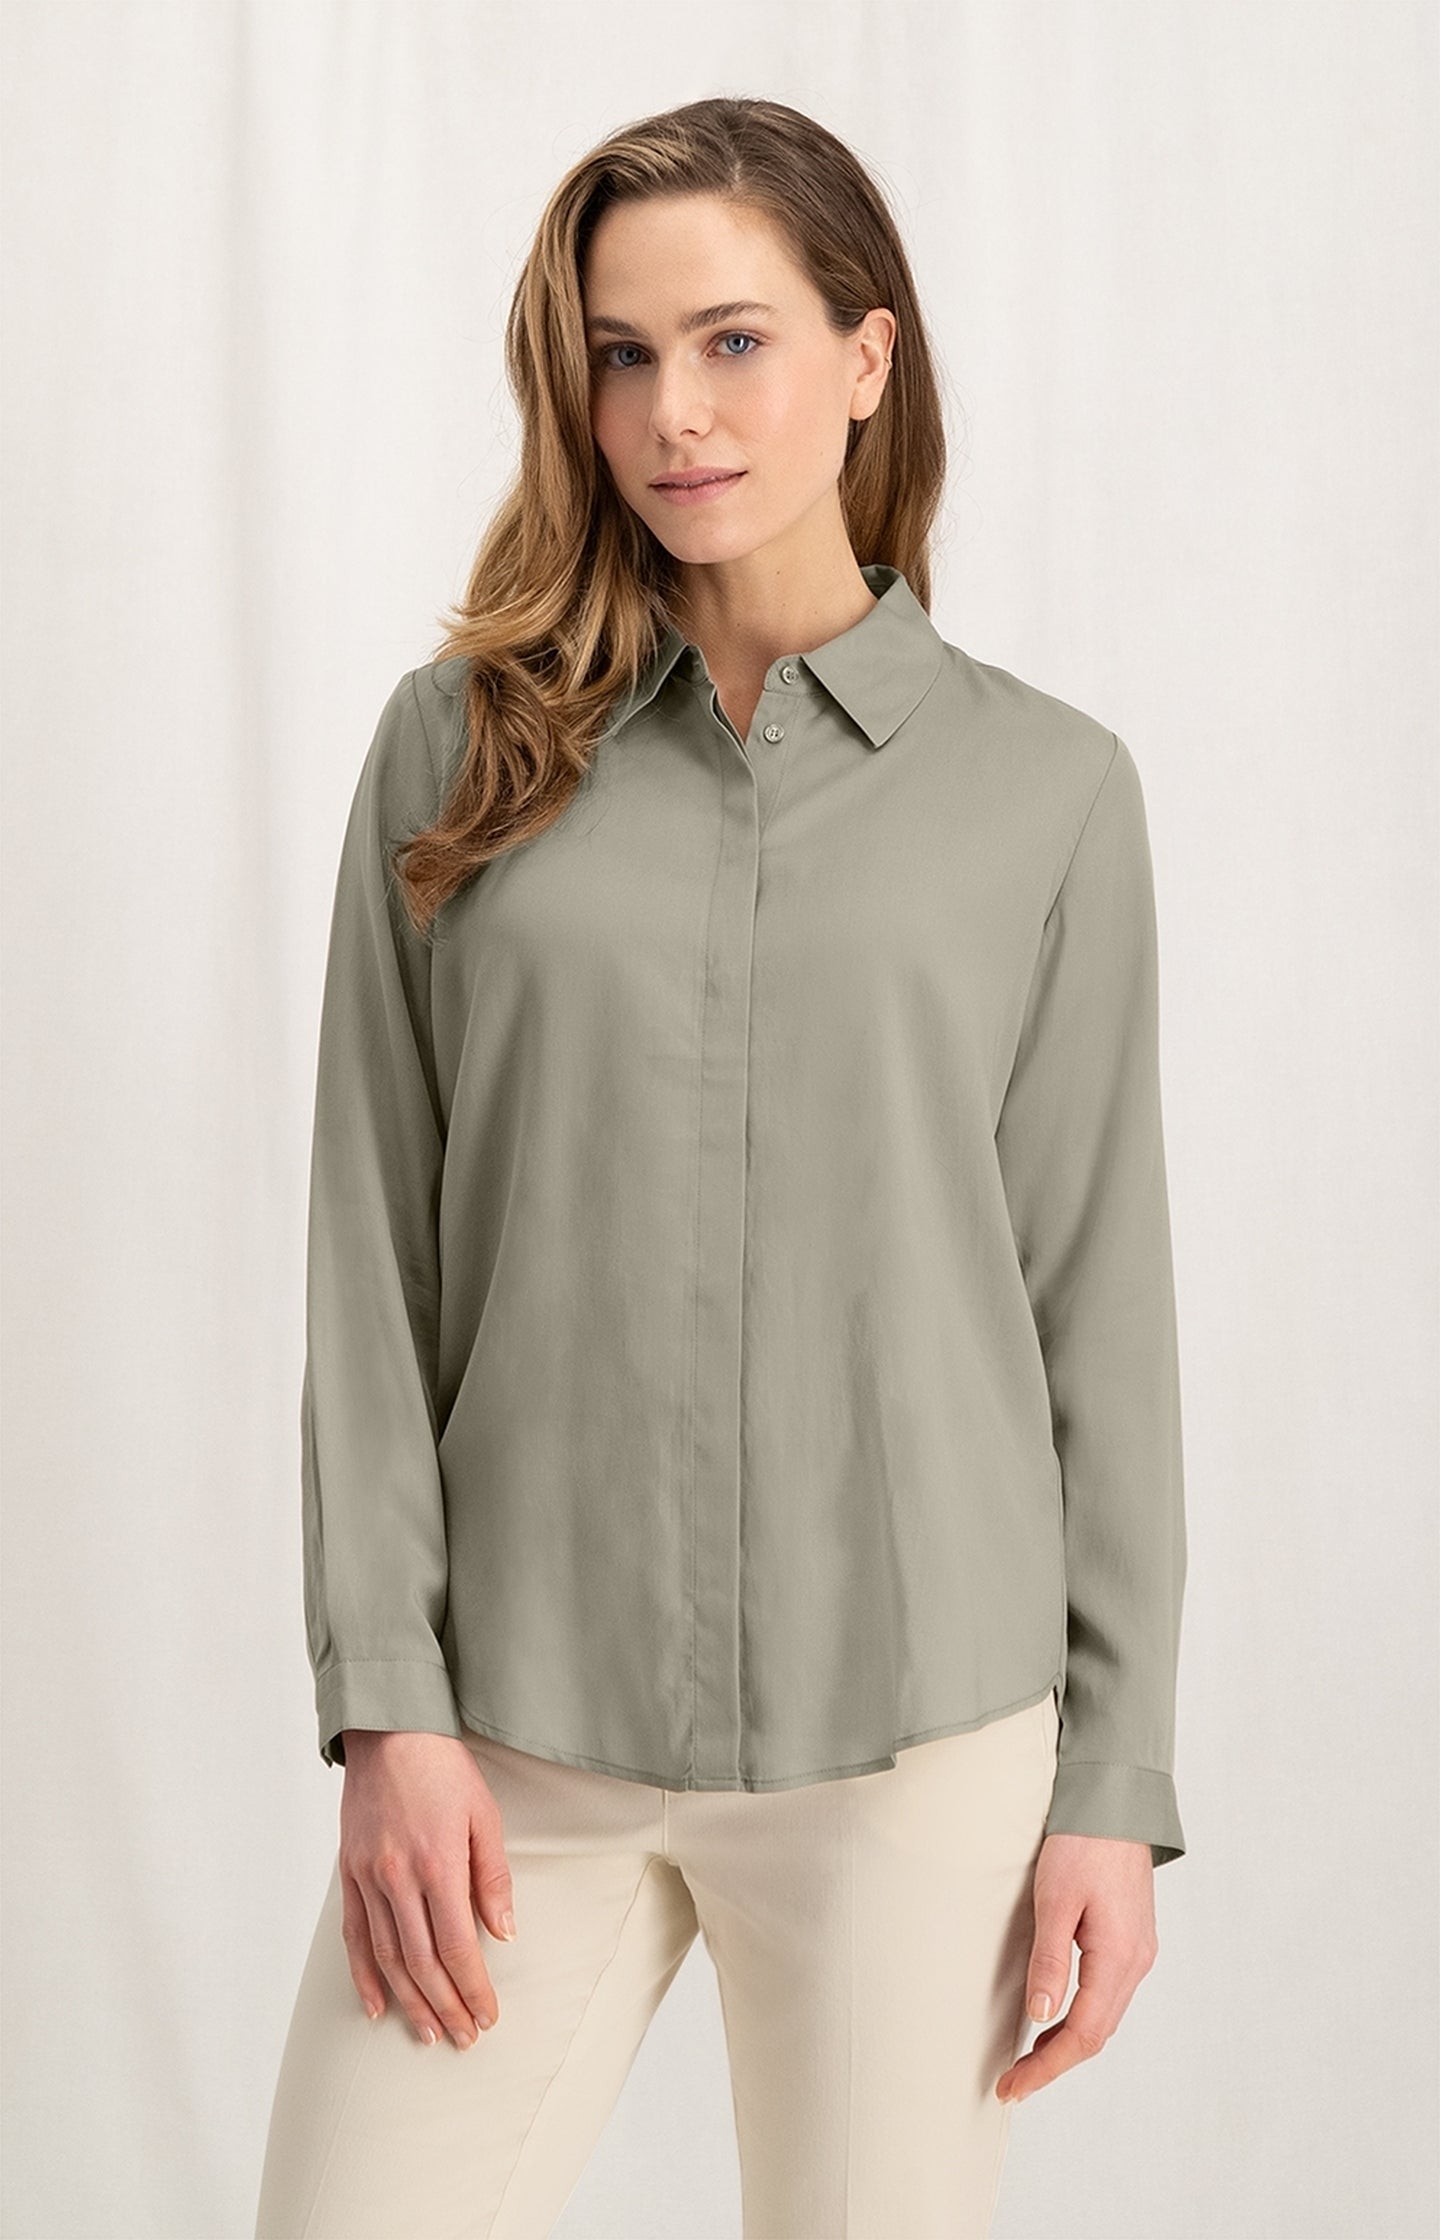 Soft poplin blouse with long sleeves, collar and buttons - Type: lookbook